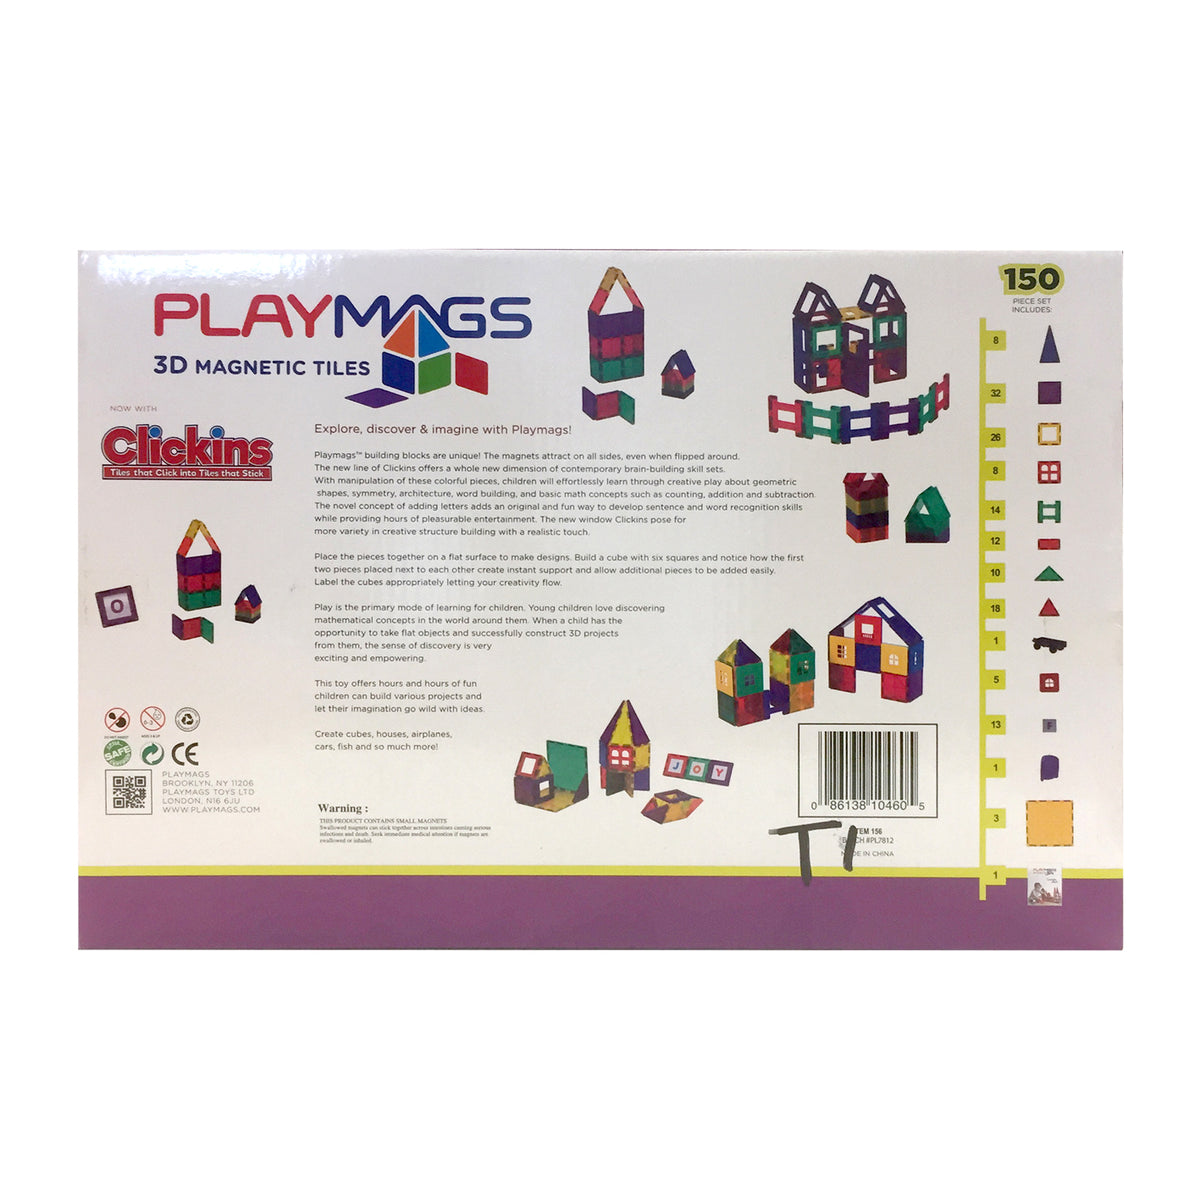 Playmags 100 Piece Set: Now With Stronger Magnets, Sturdy,Super Durable  With Vivid Clear Color Tiles. 18 Piece Clickins Accessories To Enhance Your  Creativity 